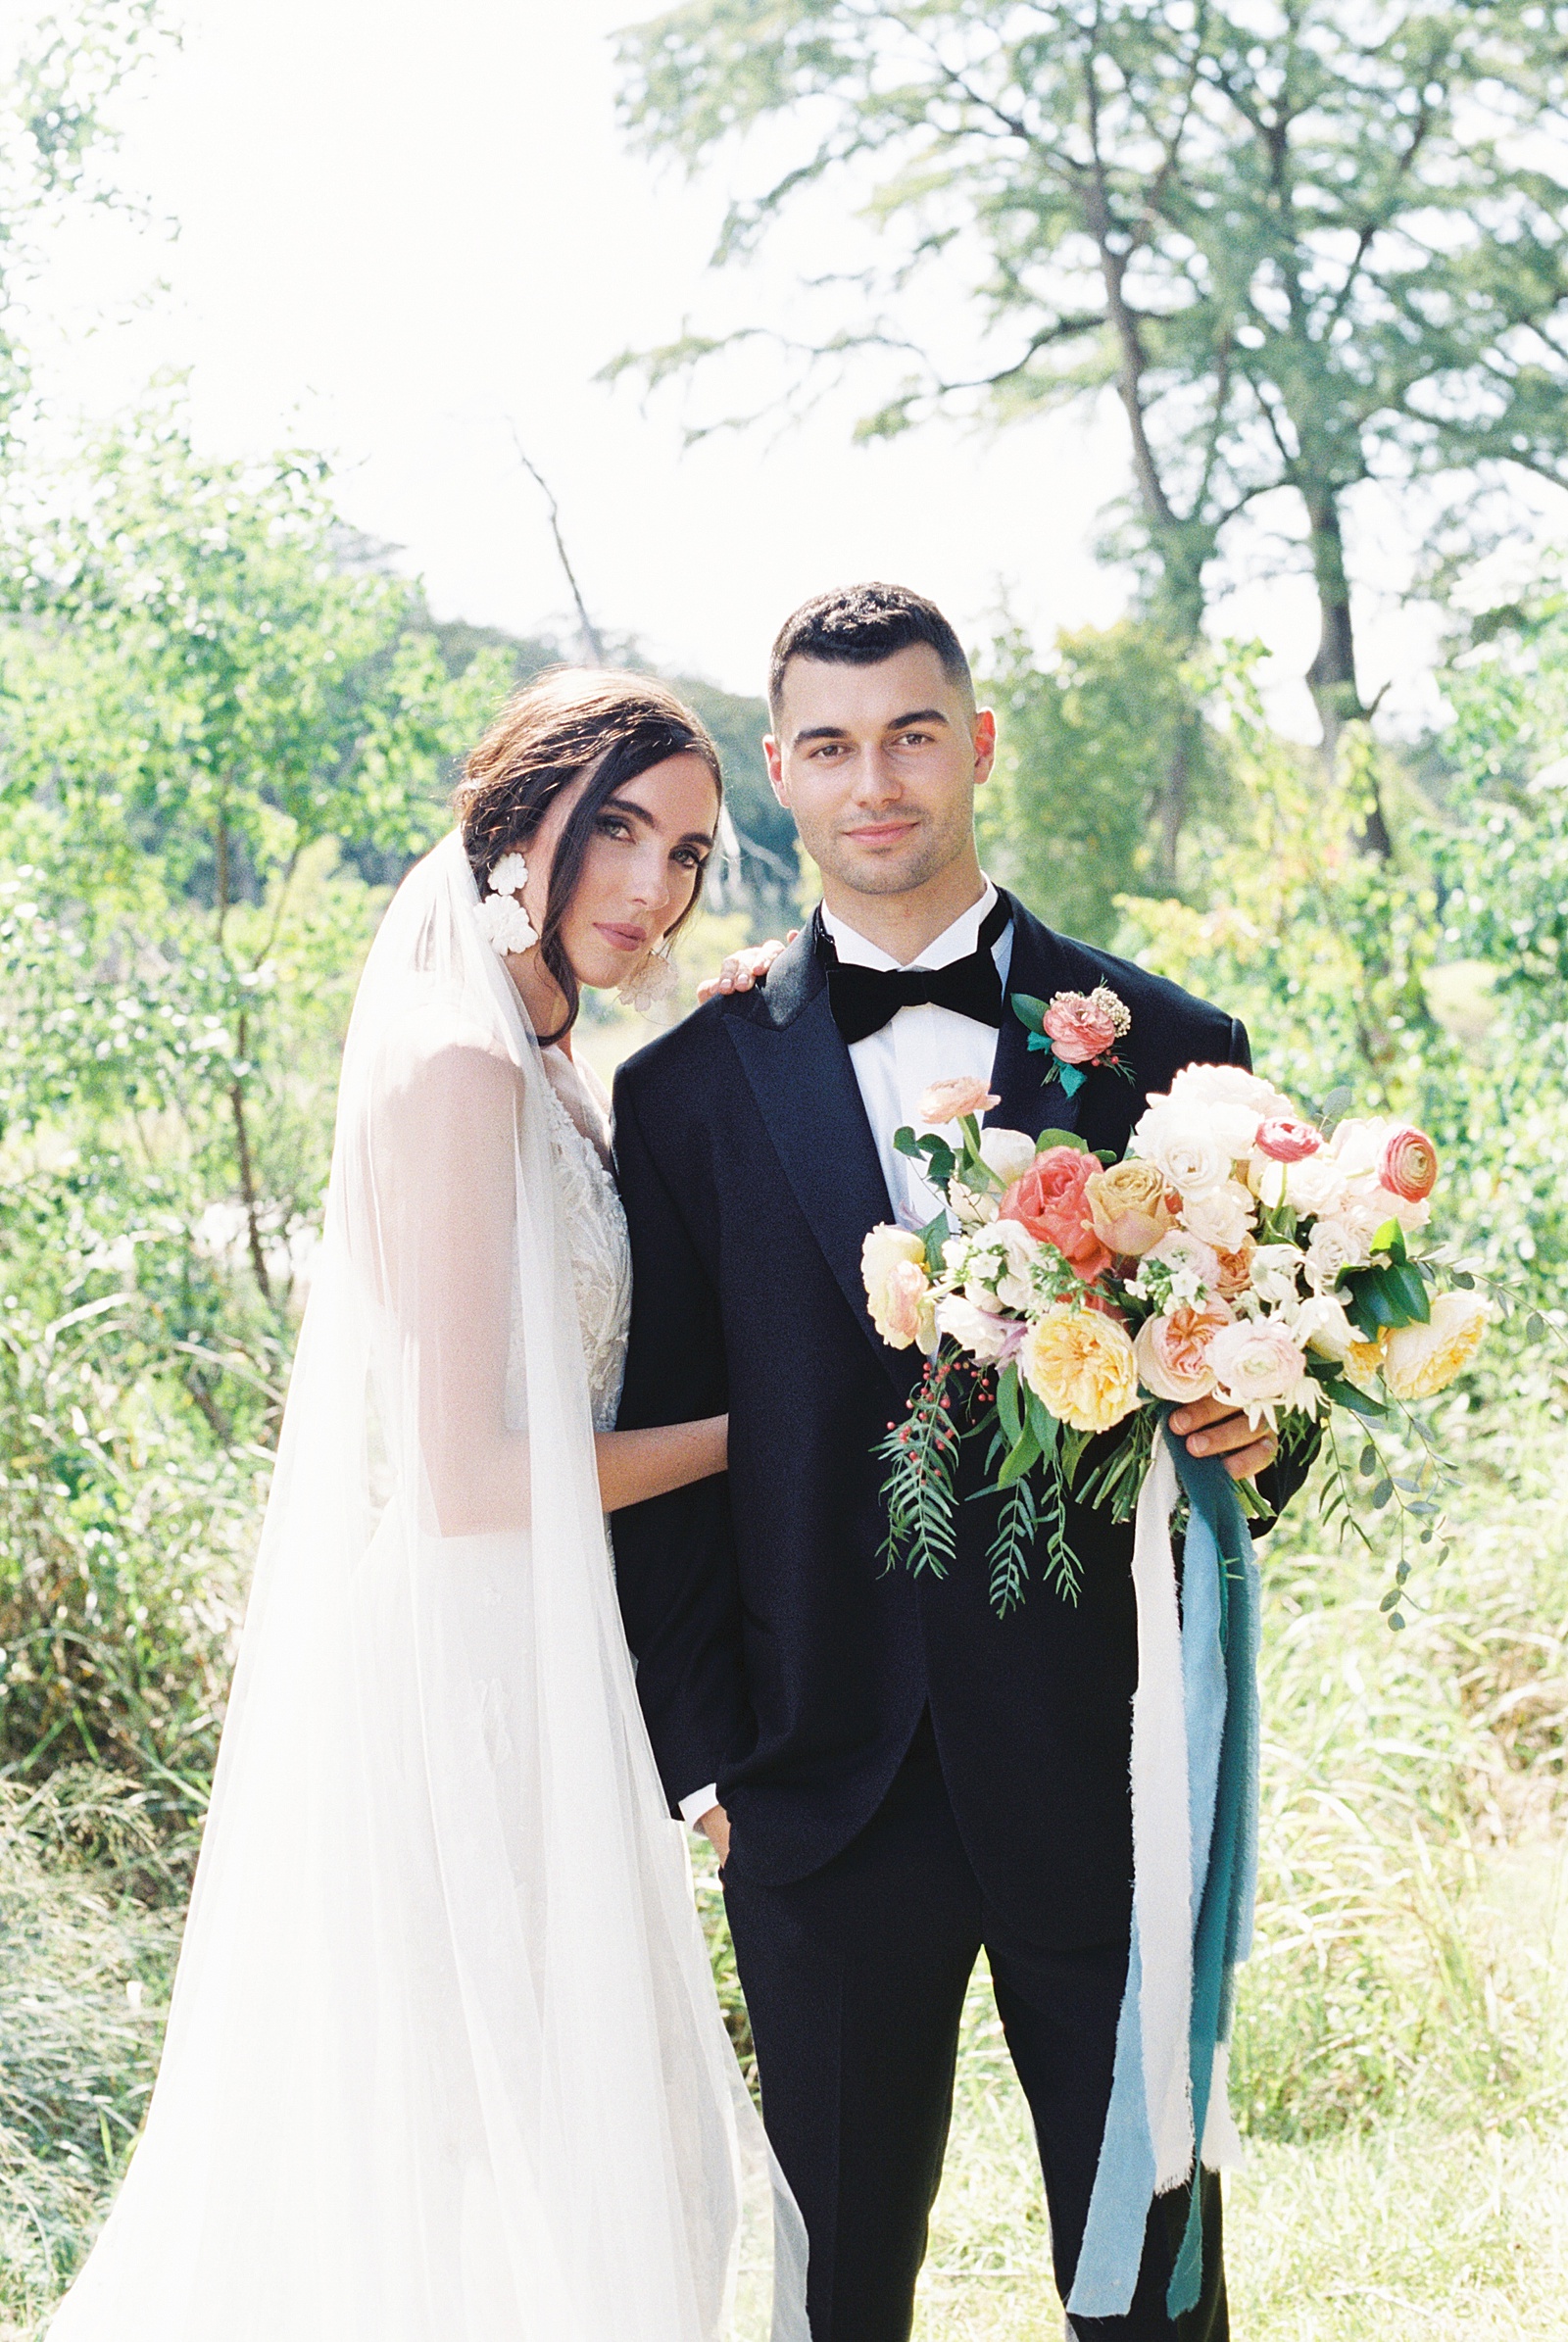 Hill Country Wedding Day, Spring Wedding Inspiration, Bright Florals